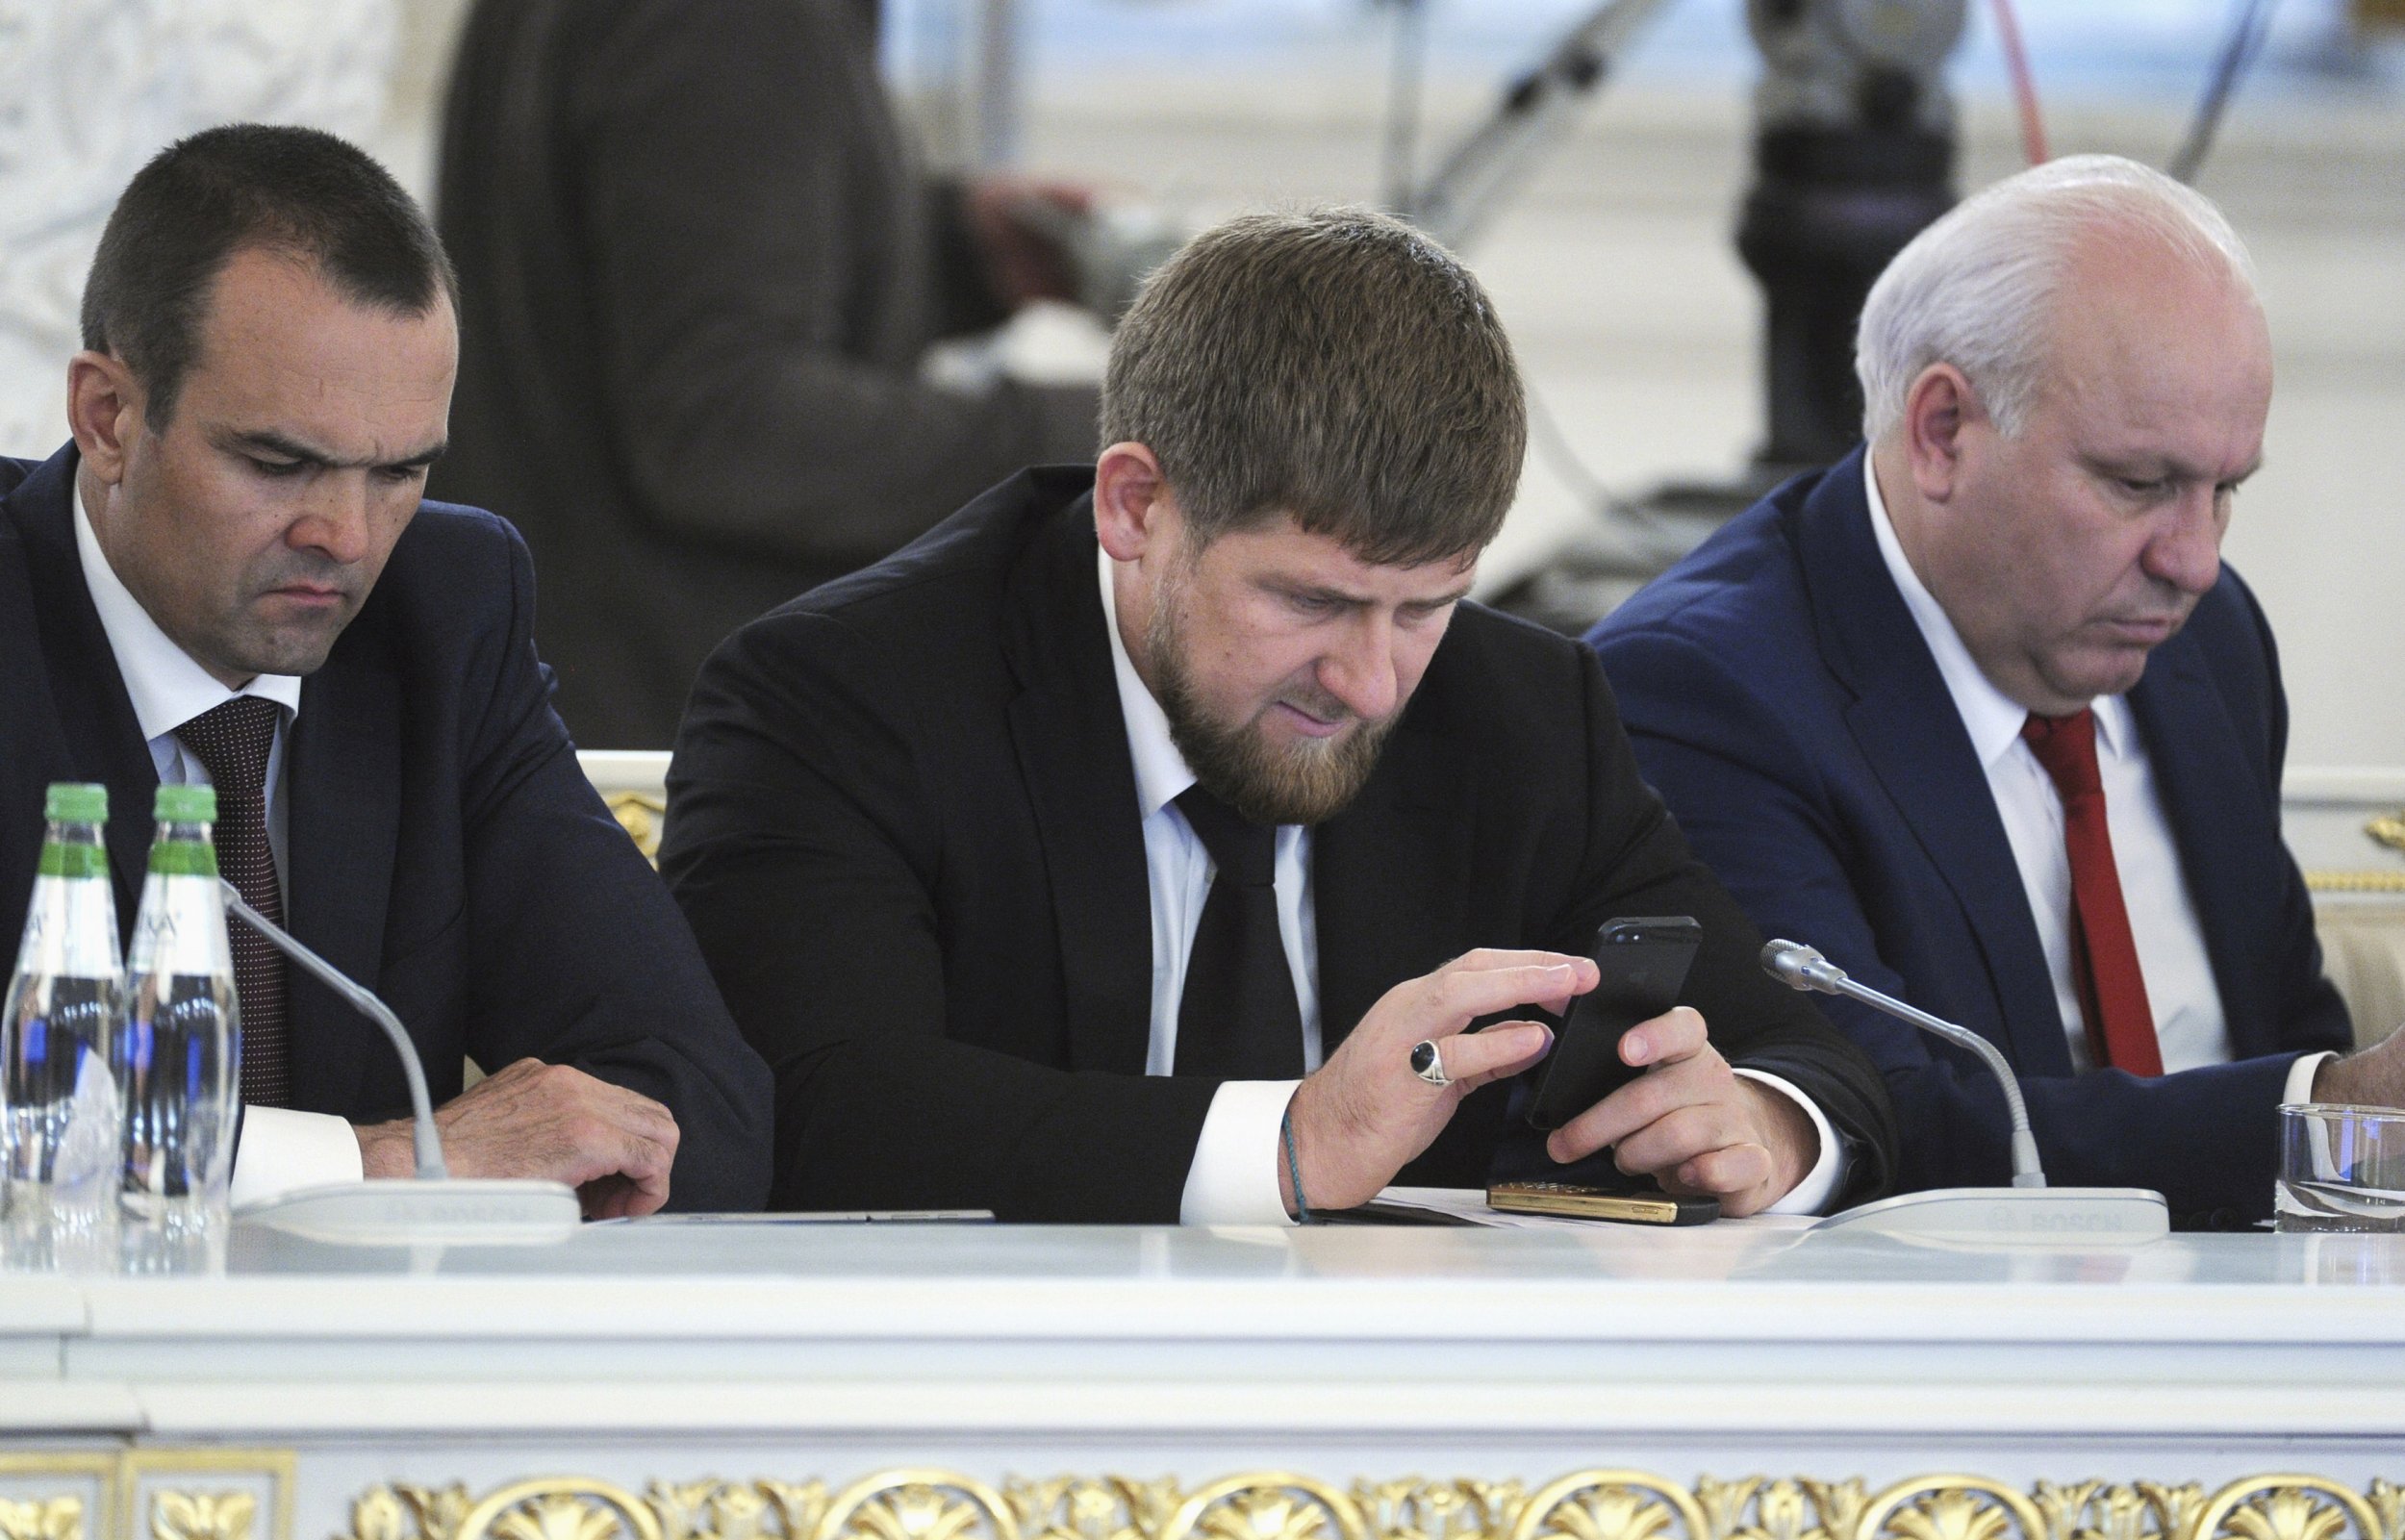 Kadyrov texting in State Council meeting